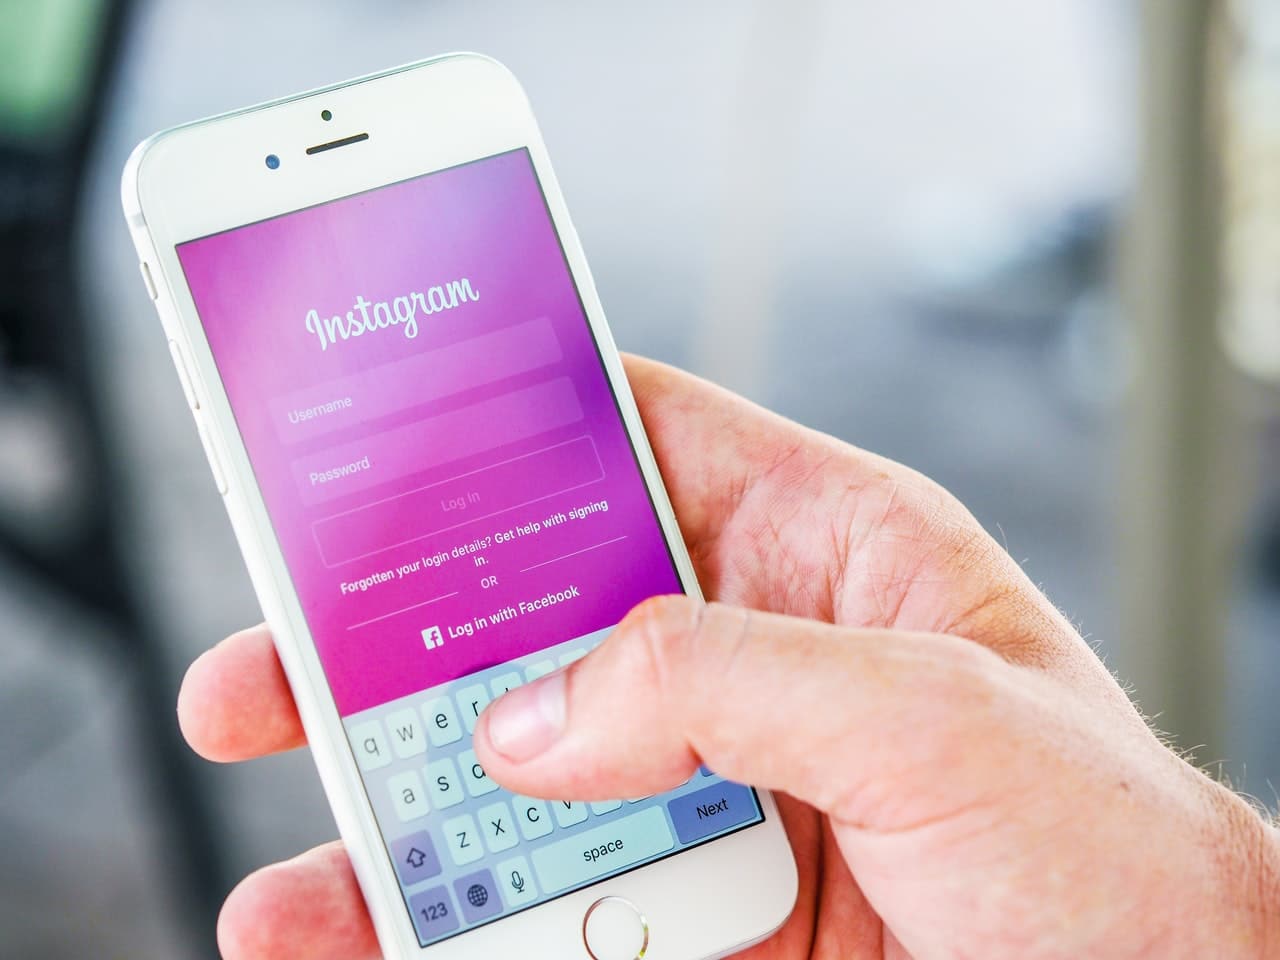 The Best 10 Tools For Getting Instagram Followers